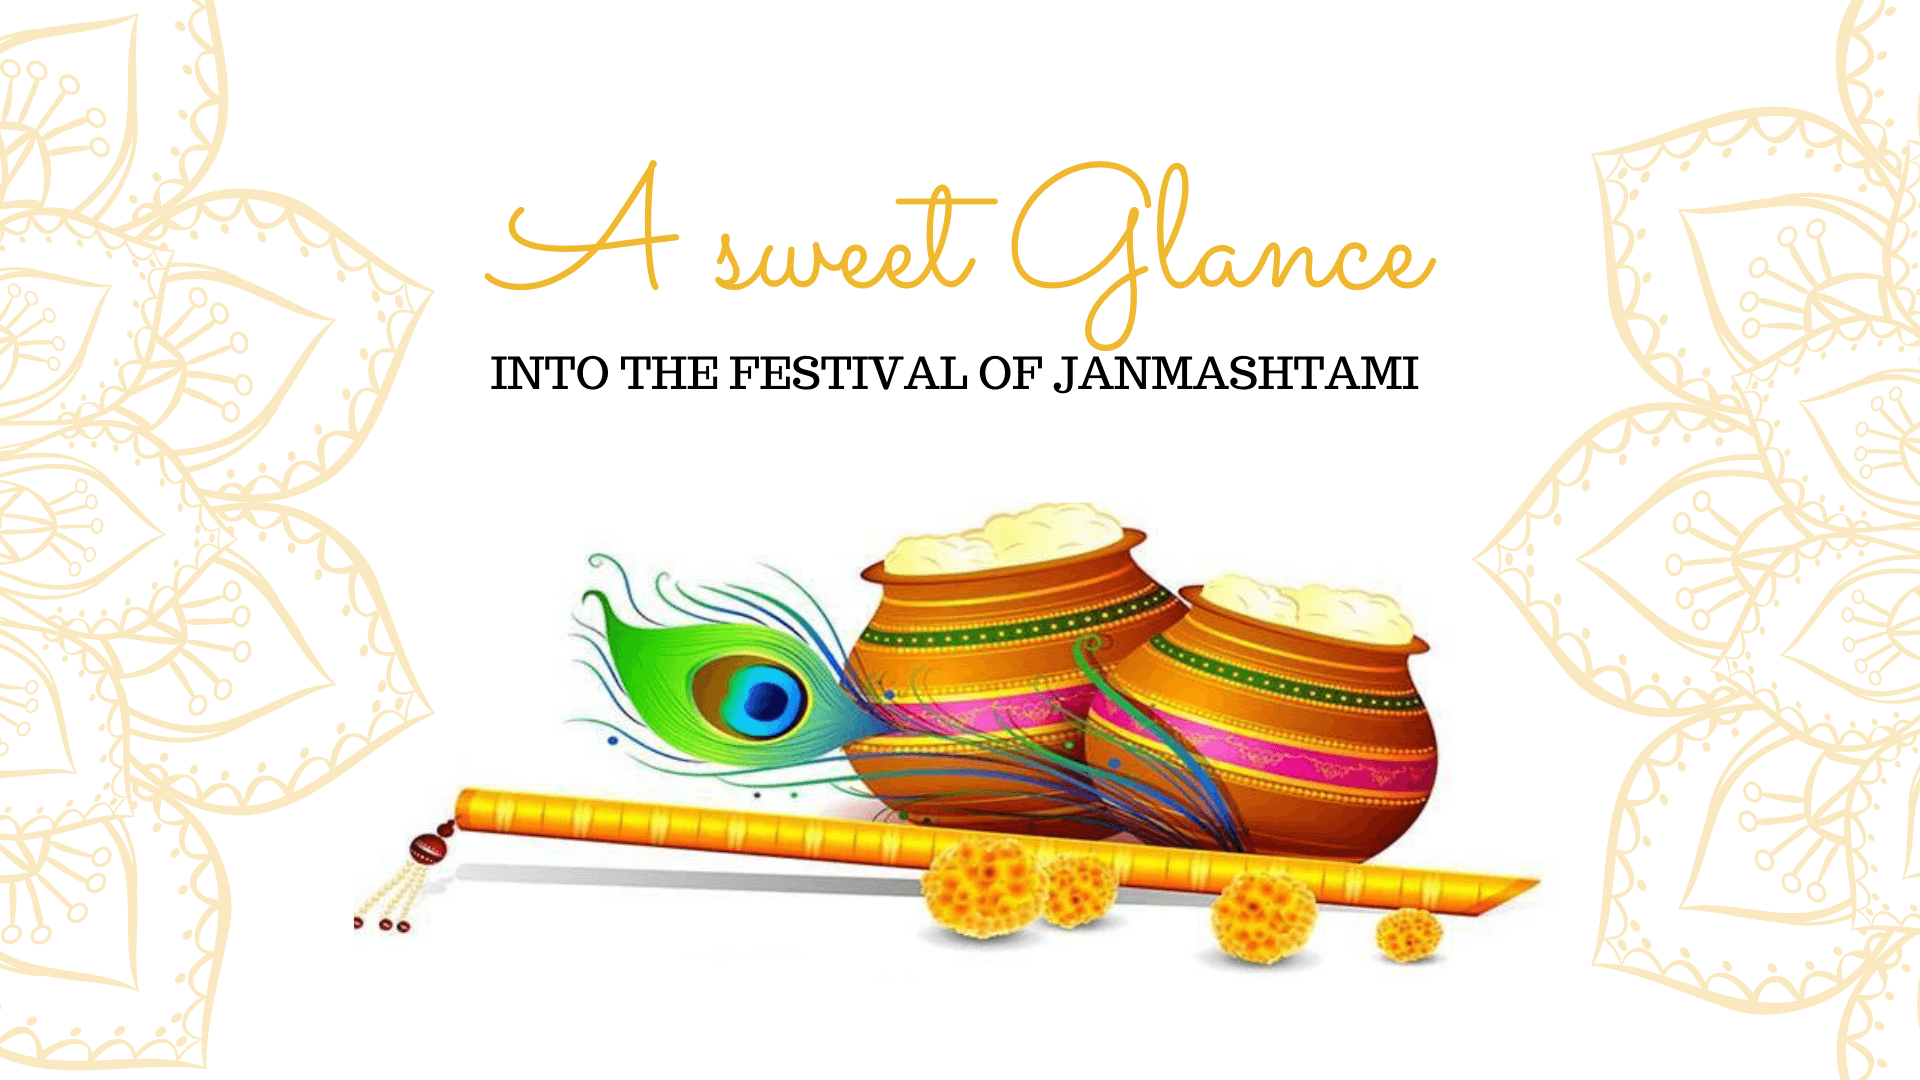 A sweet glance into the festival of Janmashtami! – 